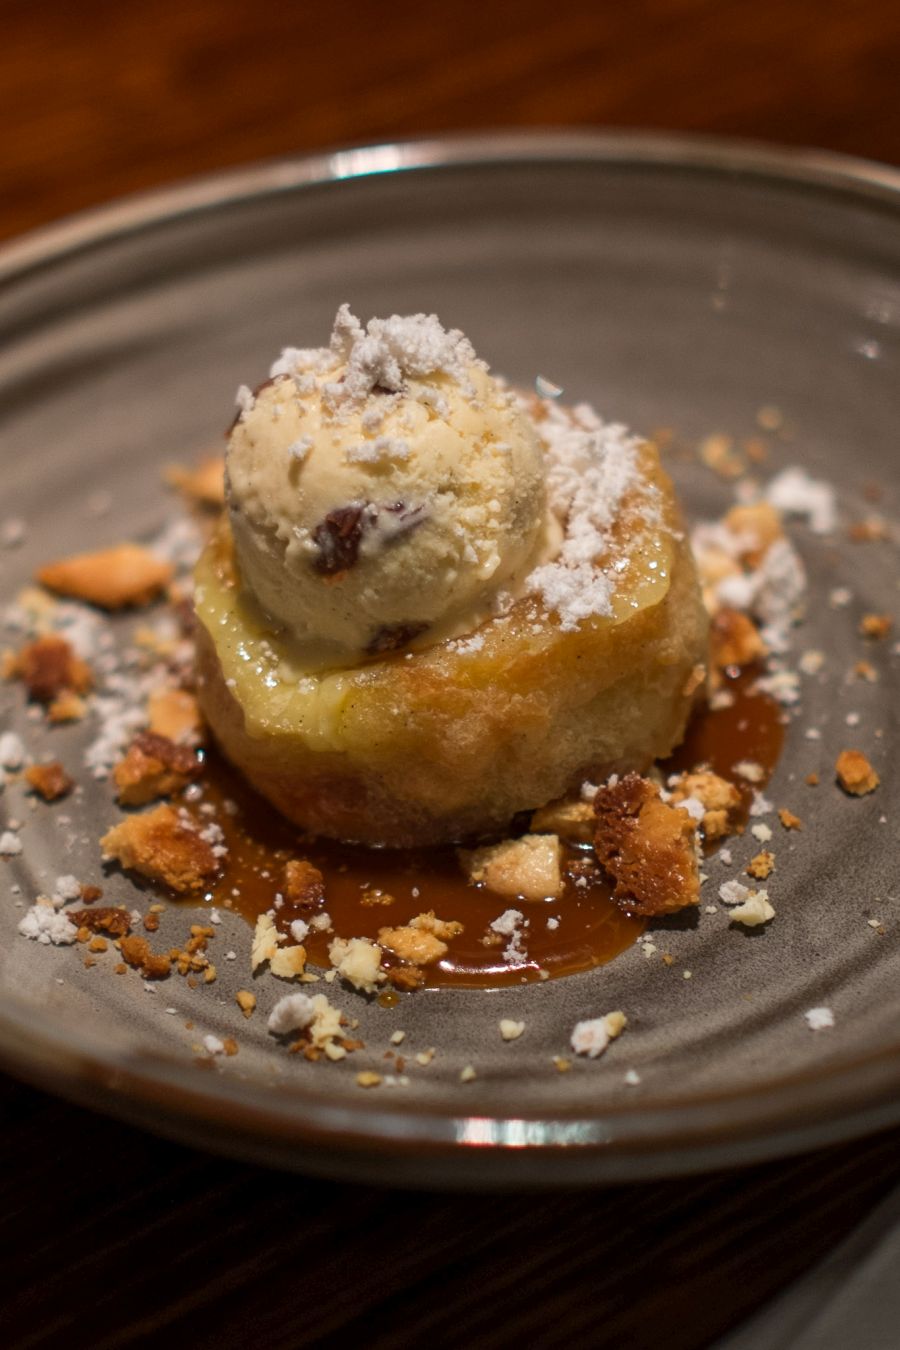 Croissant bread and butter pudding, salted caramel, Captain Morgan's ice cream (AU$14)